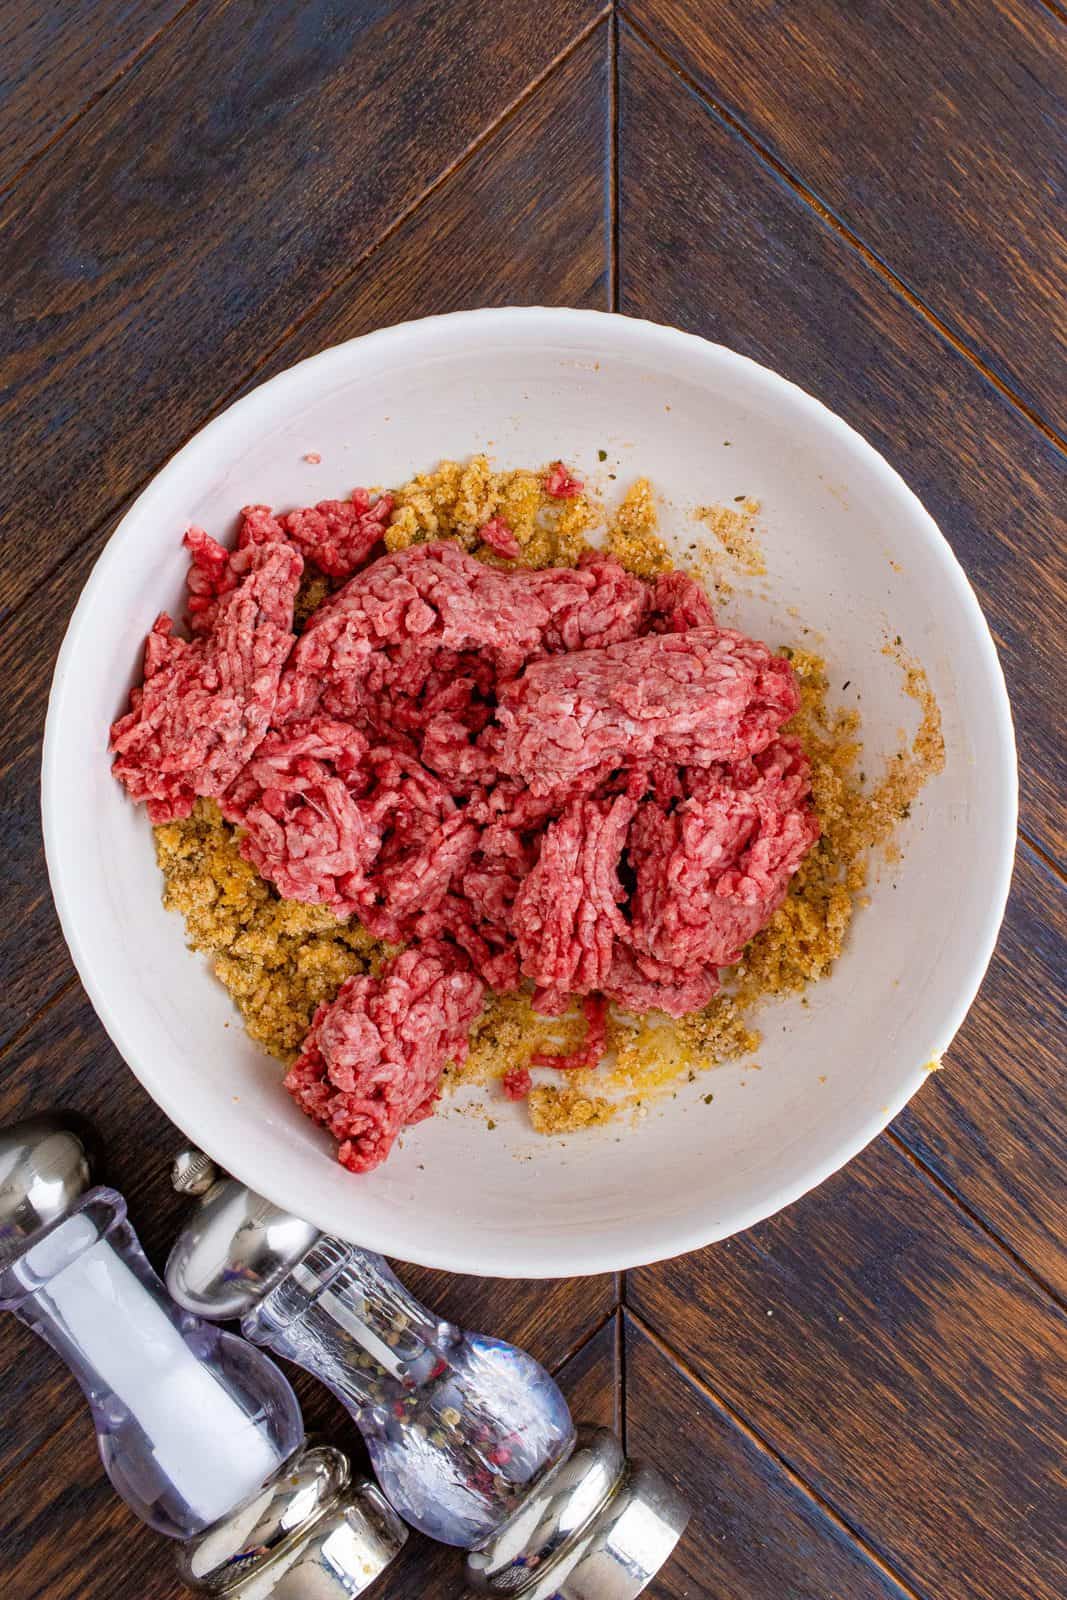 Ground beef added to mixture in bowl.